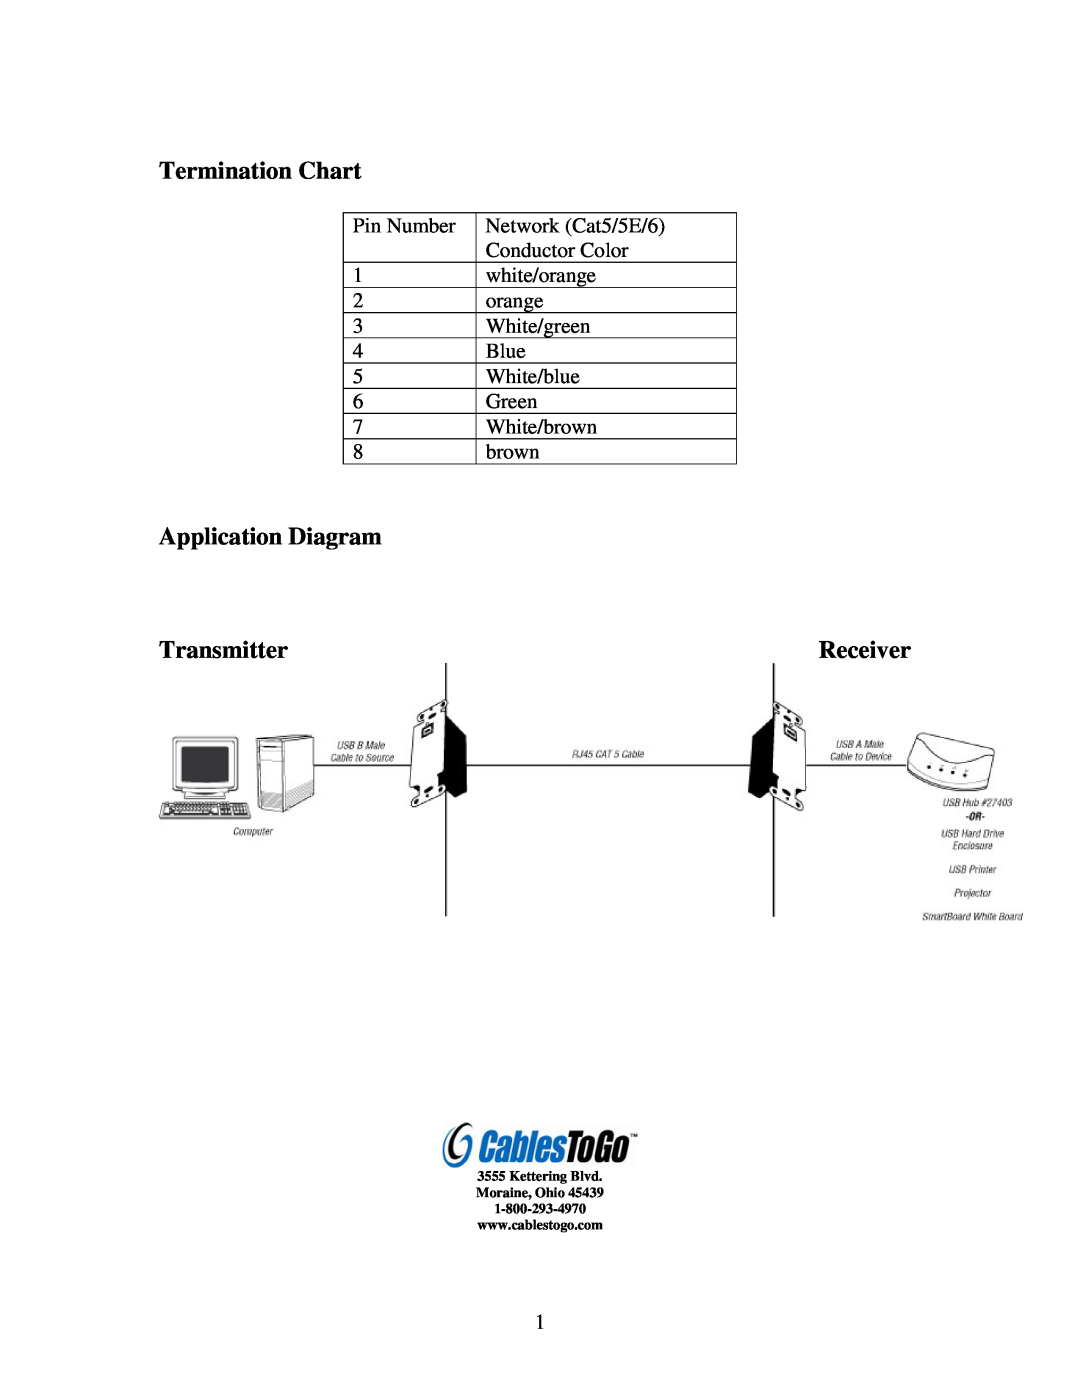 Cables to Go 29347 user manual Termination Chart, Application Diagram, Transmitter, Receiver 